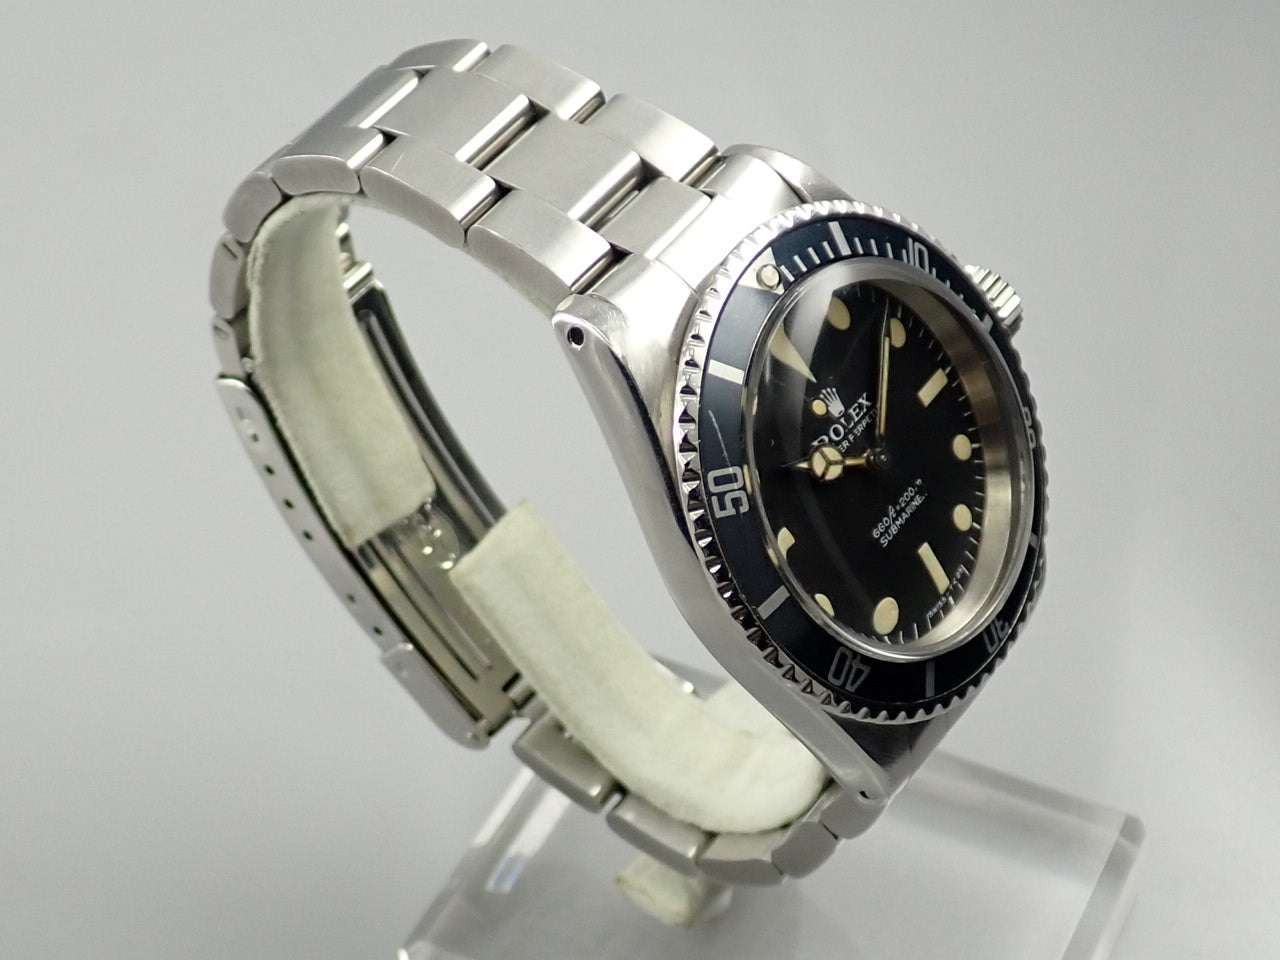 Rolex Submariner &lt;Box and other items&gt;